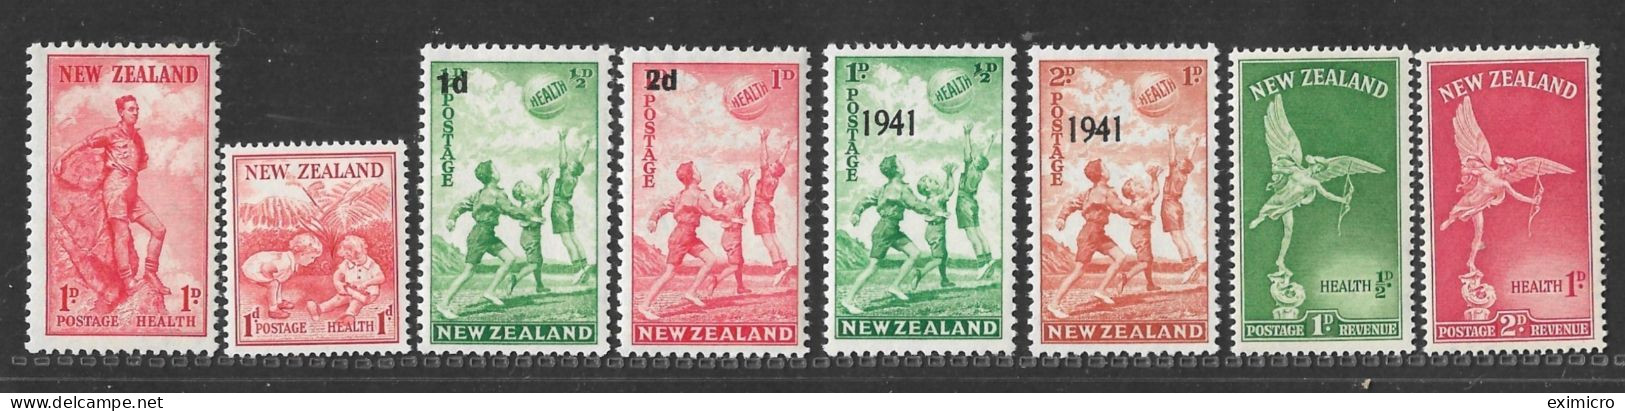 NEW ZEALAND UNMOUNTED MINT COLLECTION OF HEALTH SETS 1937,1938,1939,1941,1947 Cat £19.85 - Unused Stamps